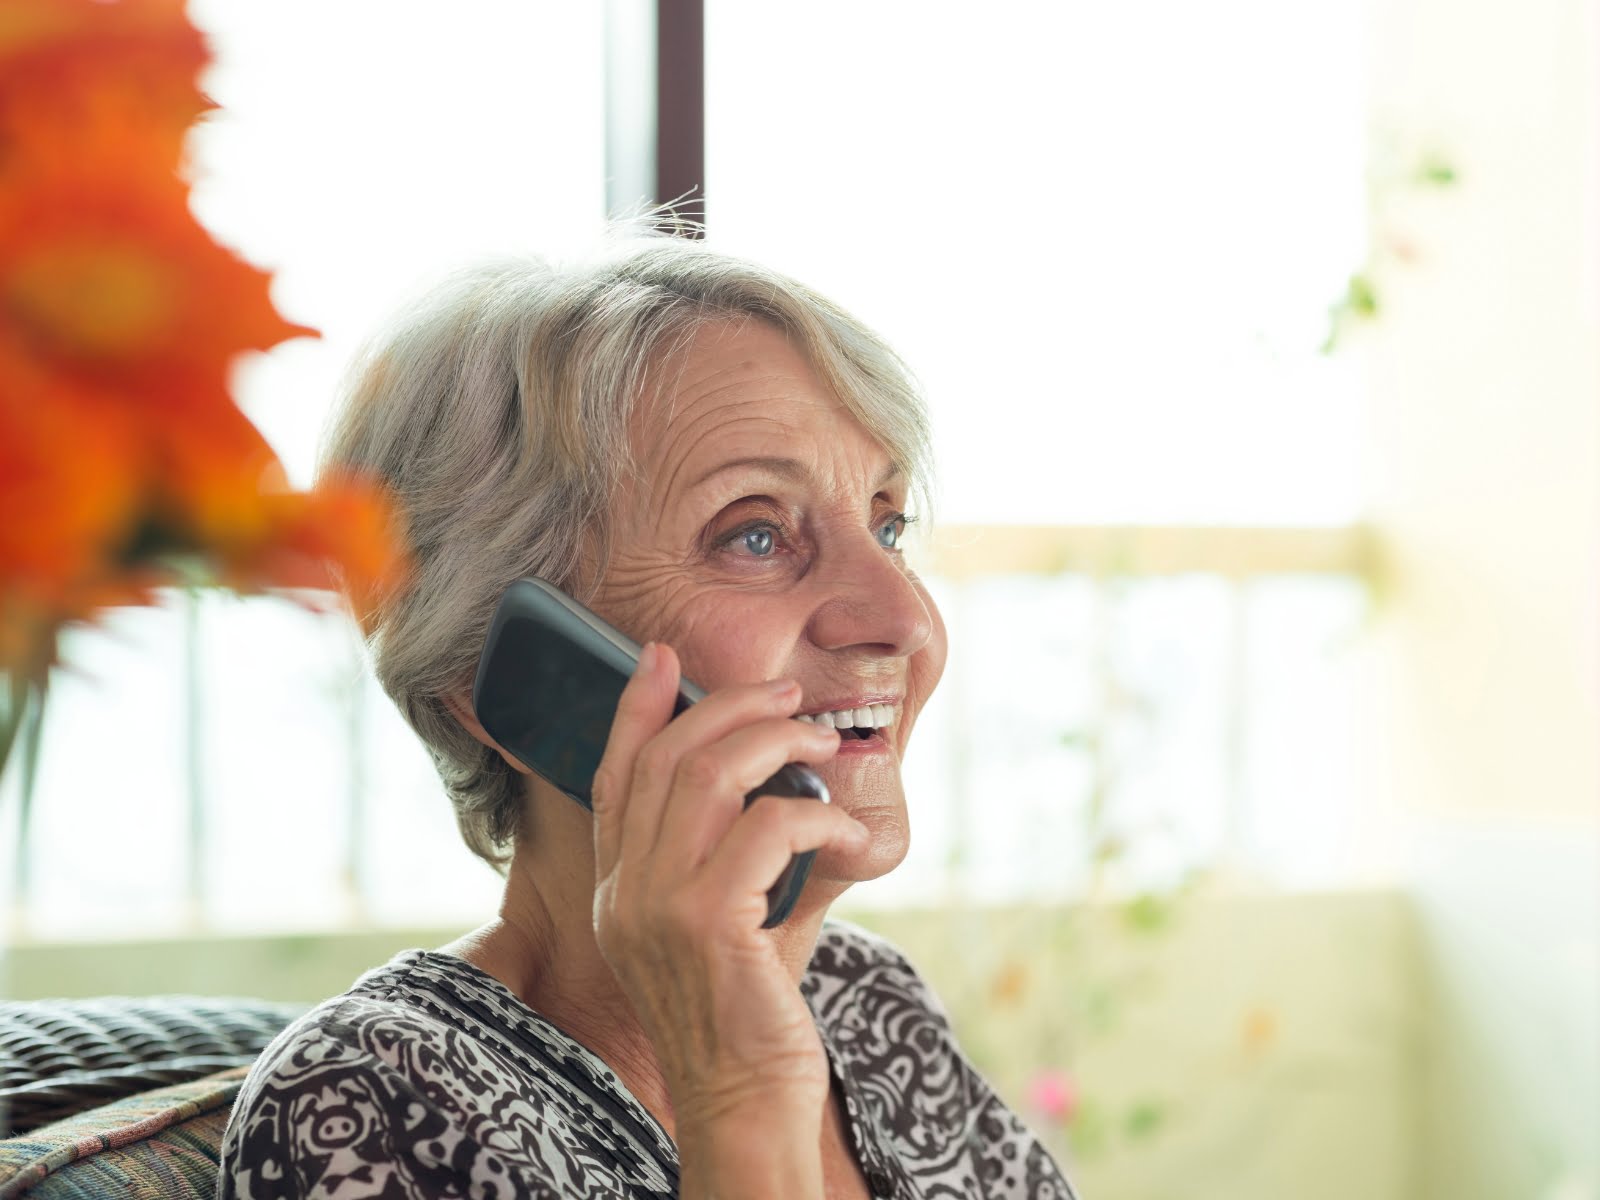 An older woman contacting someone on a cell phone.